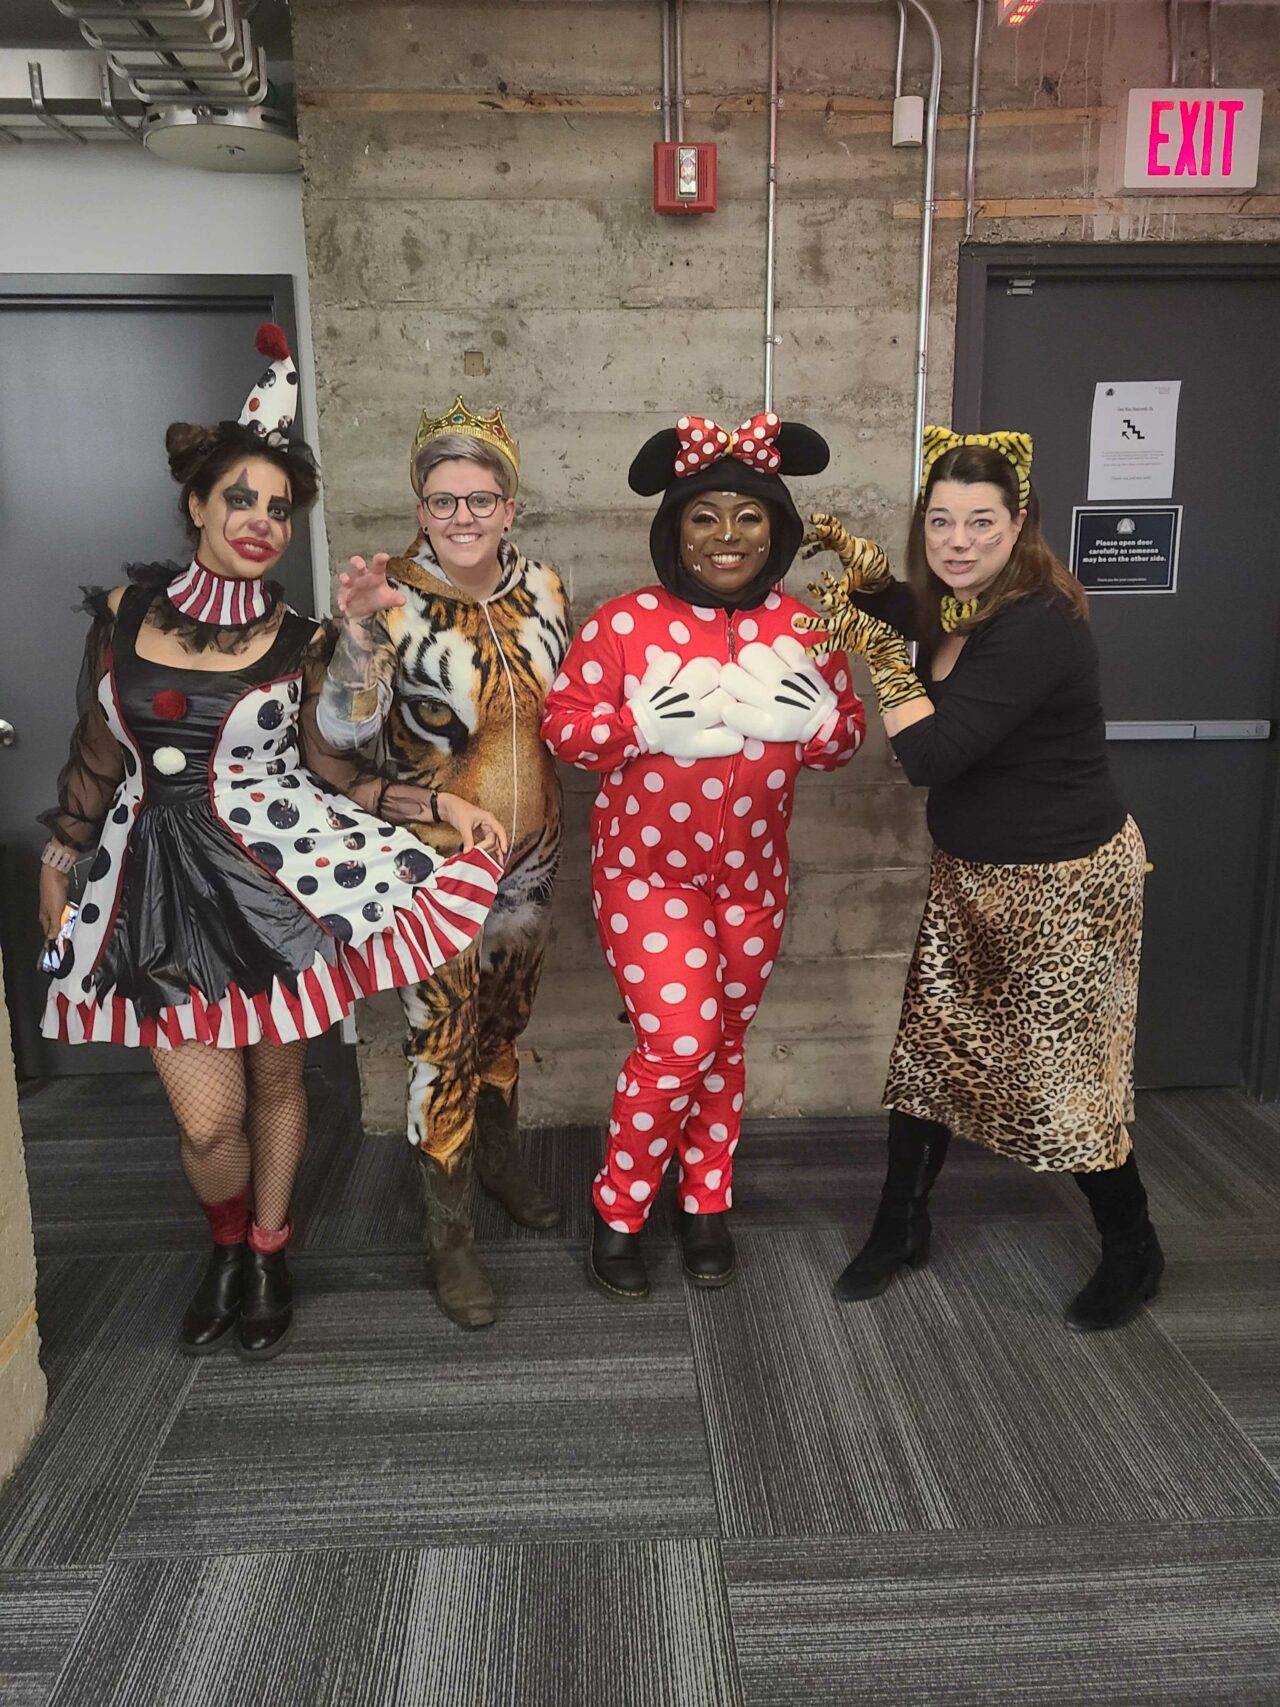 Four female Virtual Gurus staff members dressed up for Halloween one as a clown, one as a royal tiger, one as Minnie Mouse, and the other as a leopard.